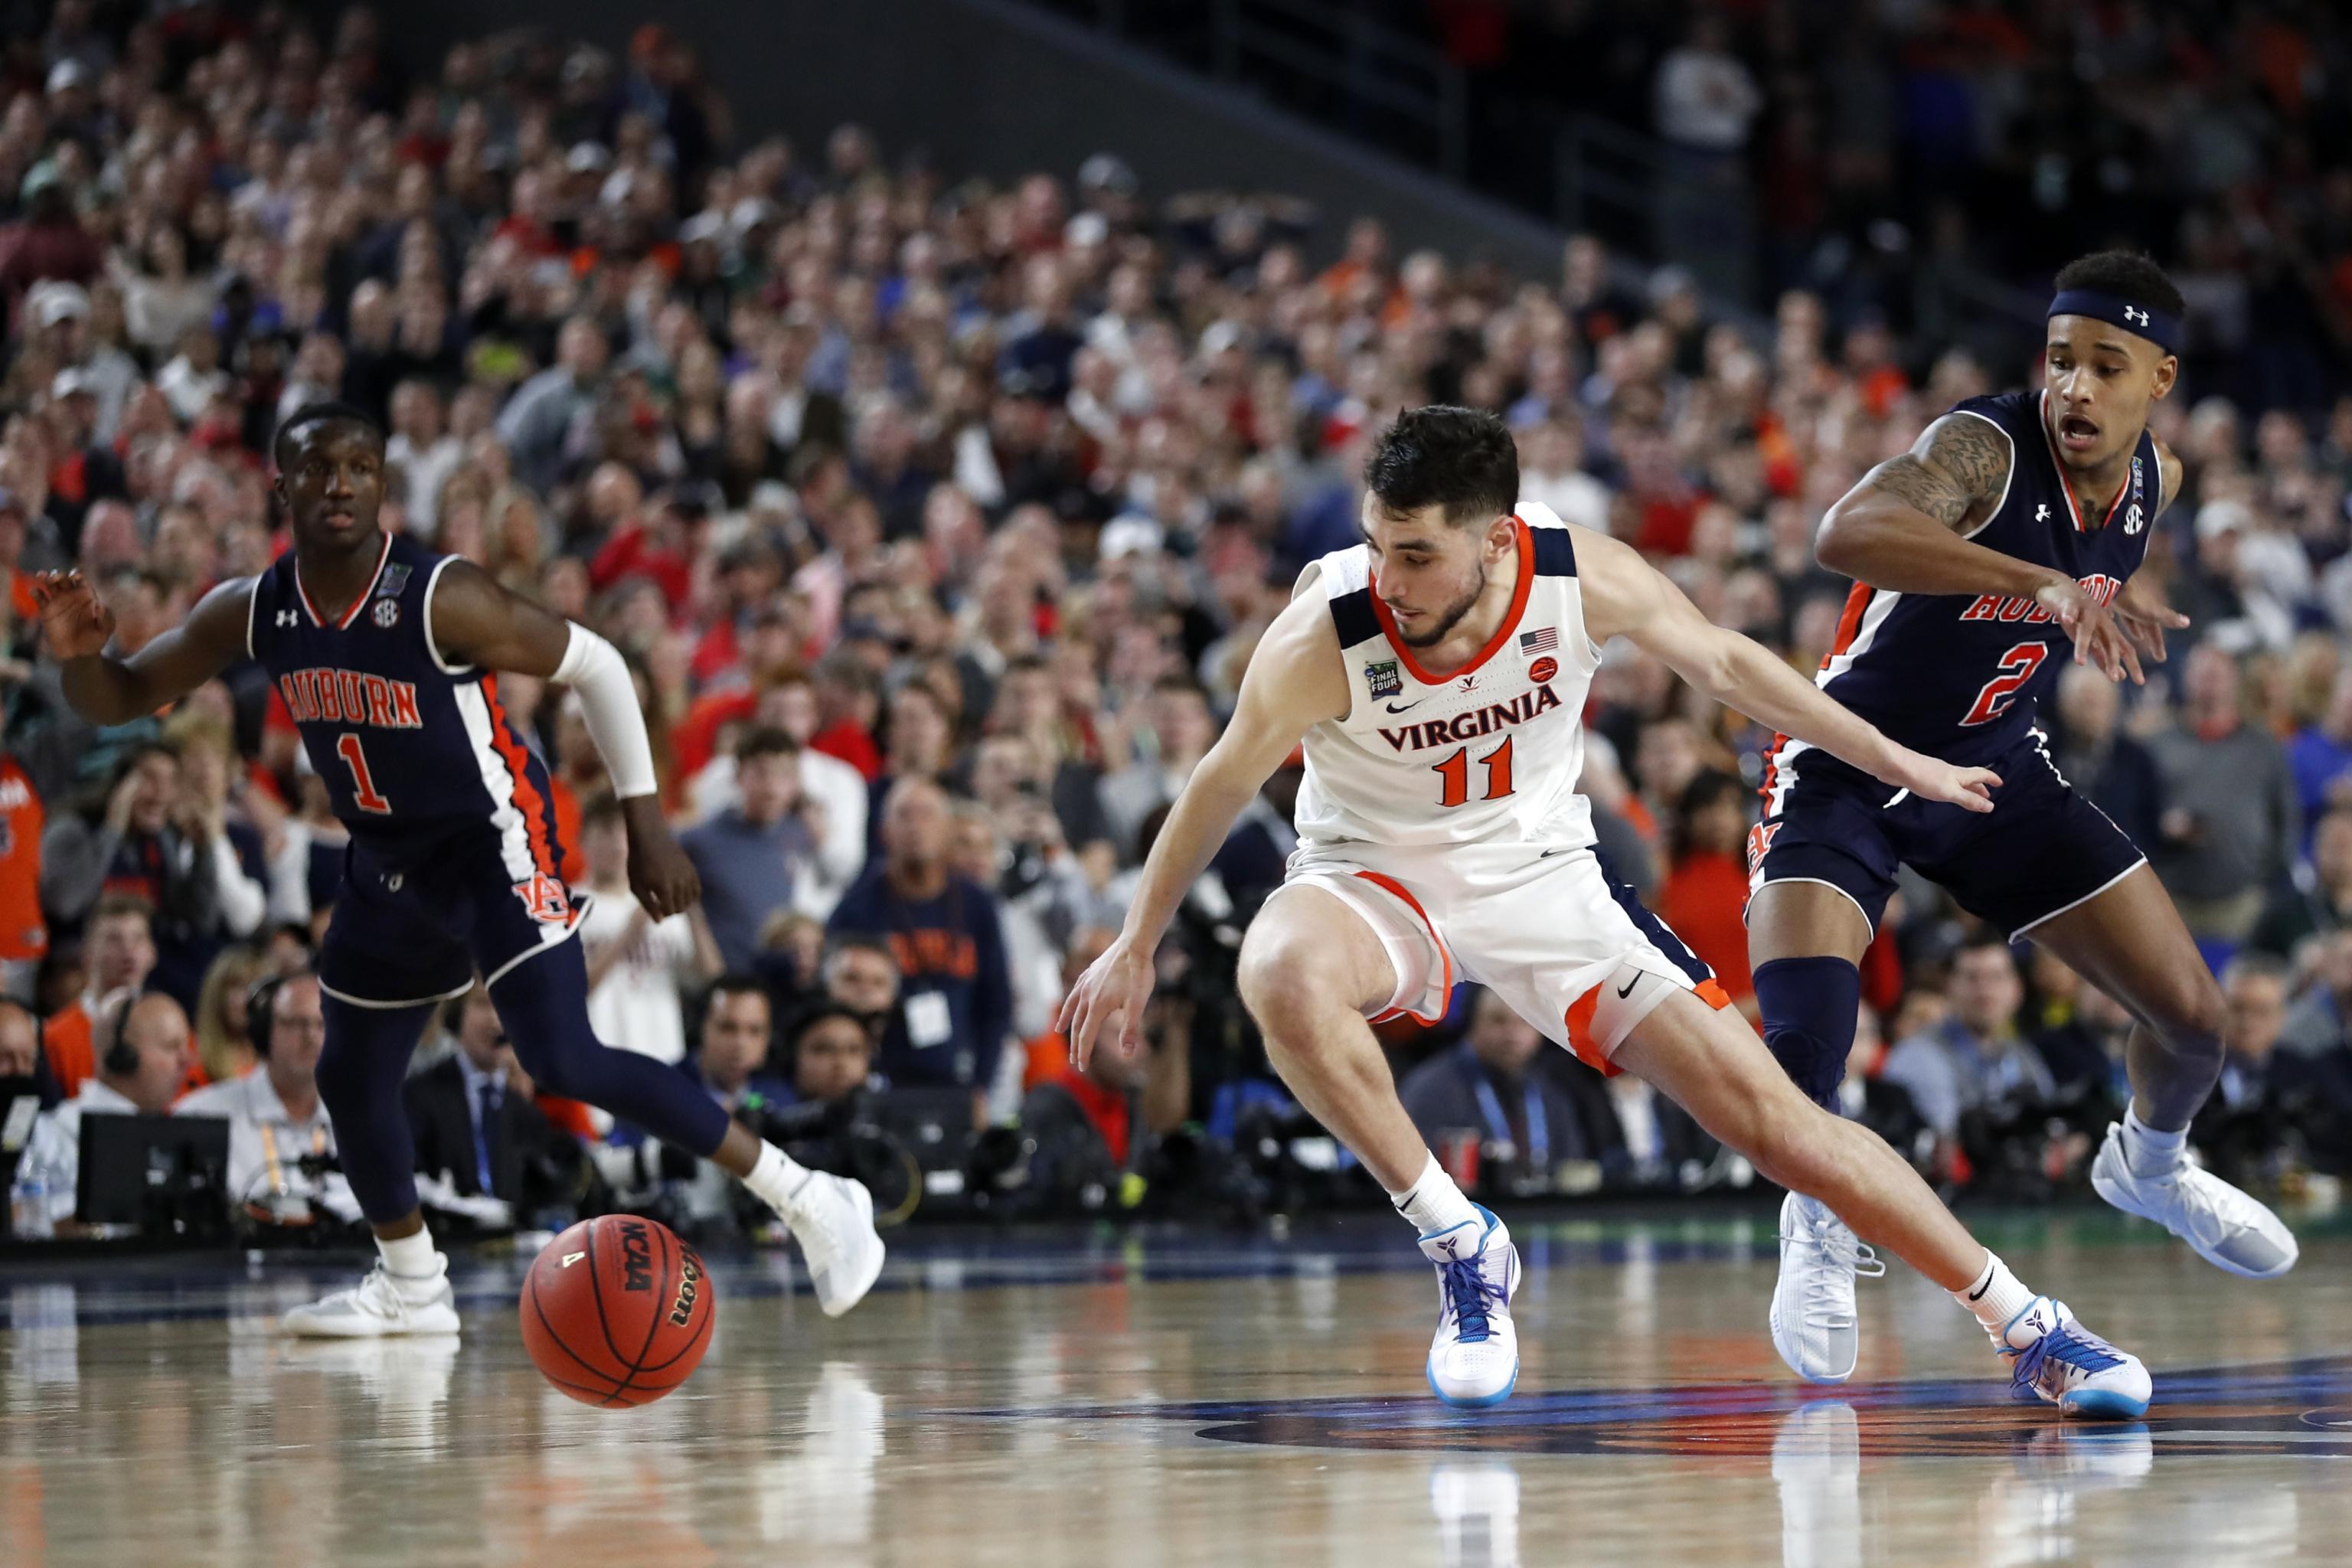 Virginia's Ty Jerome: 'I Knew' Refs Wouldn't Call Double Dribble vs